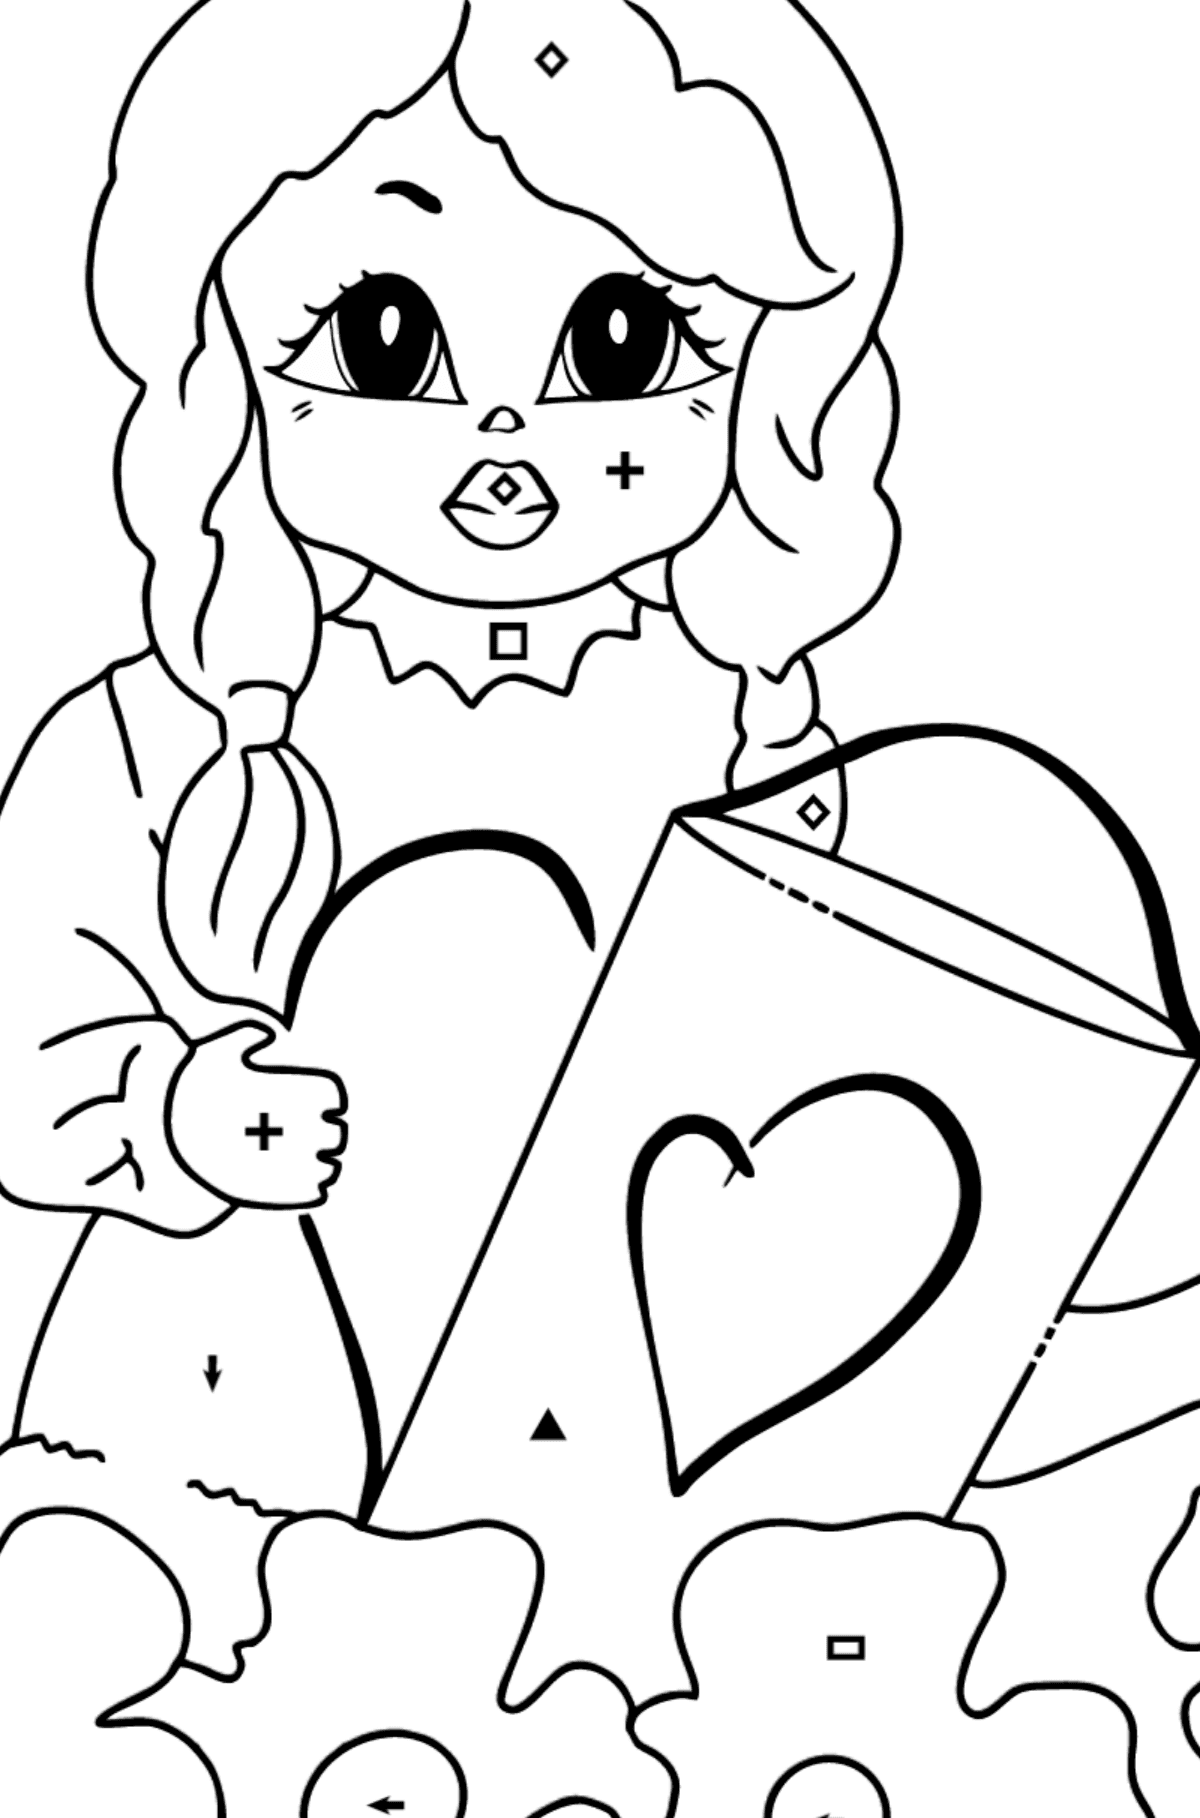 Coloring Picture - A Princess with a Watering Can - Coloring by Symbols and Geometric Shapes for Kids